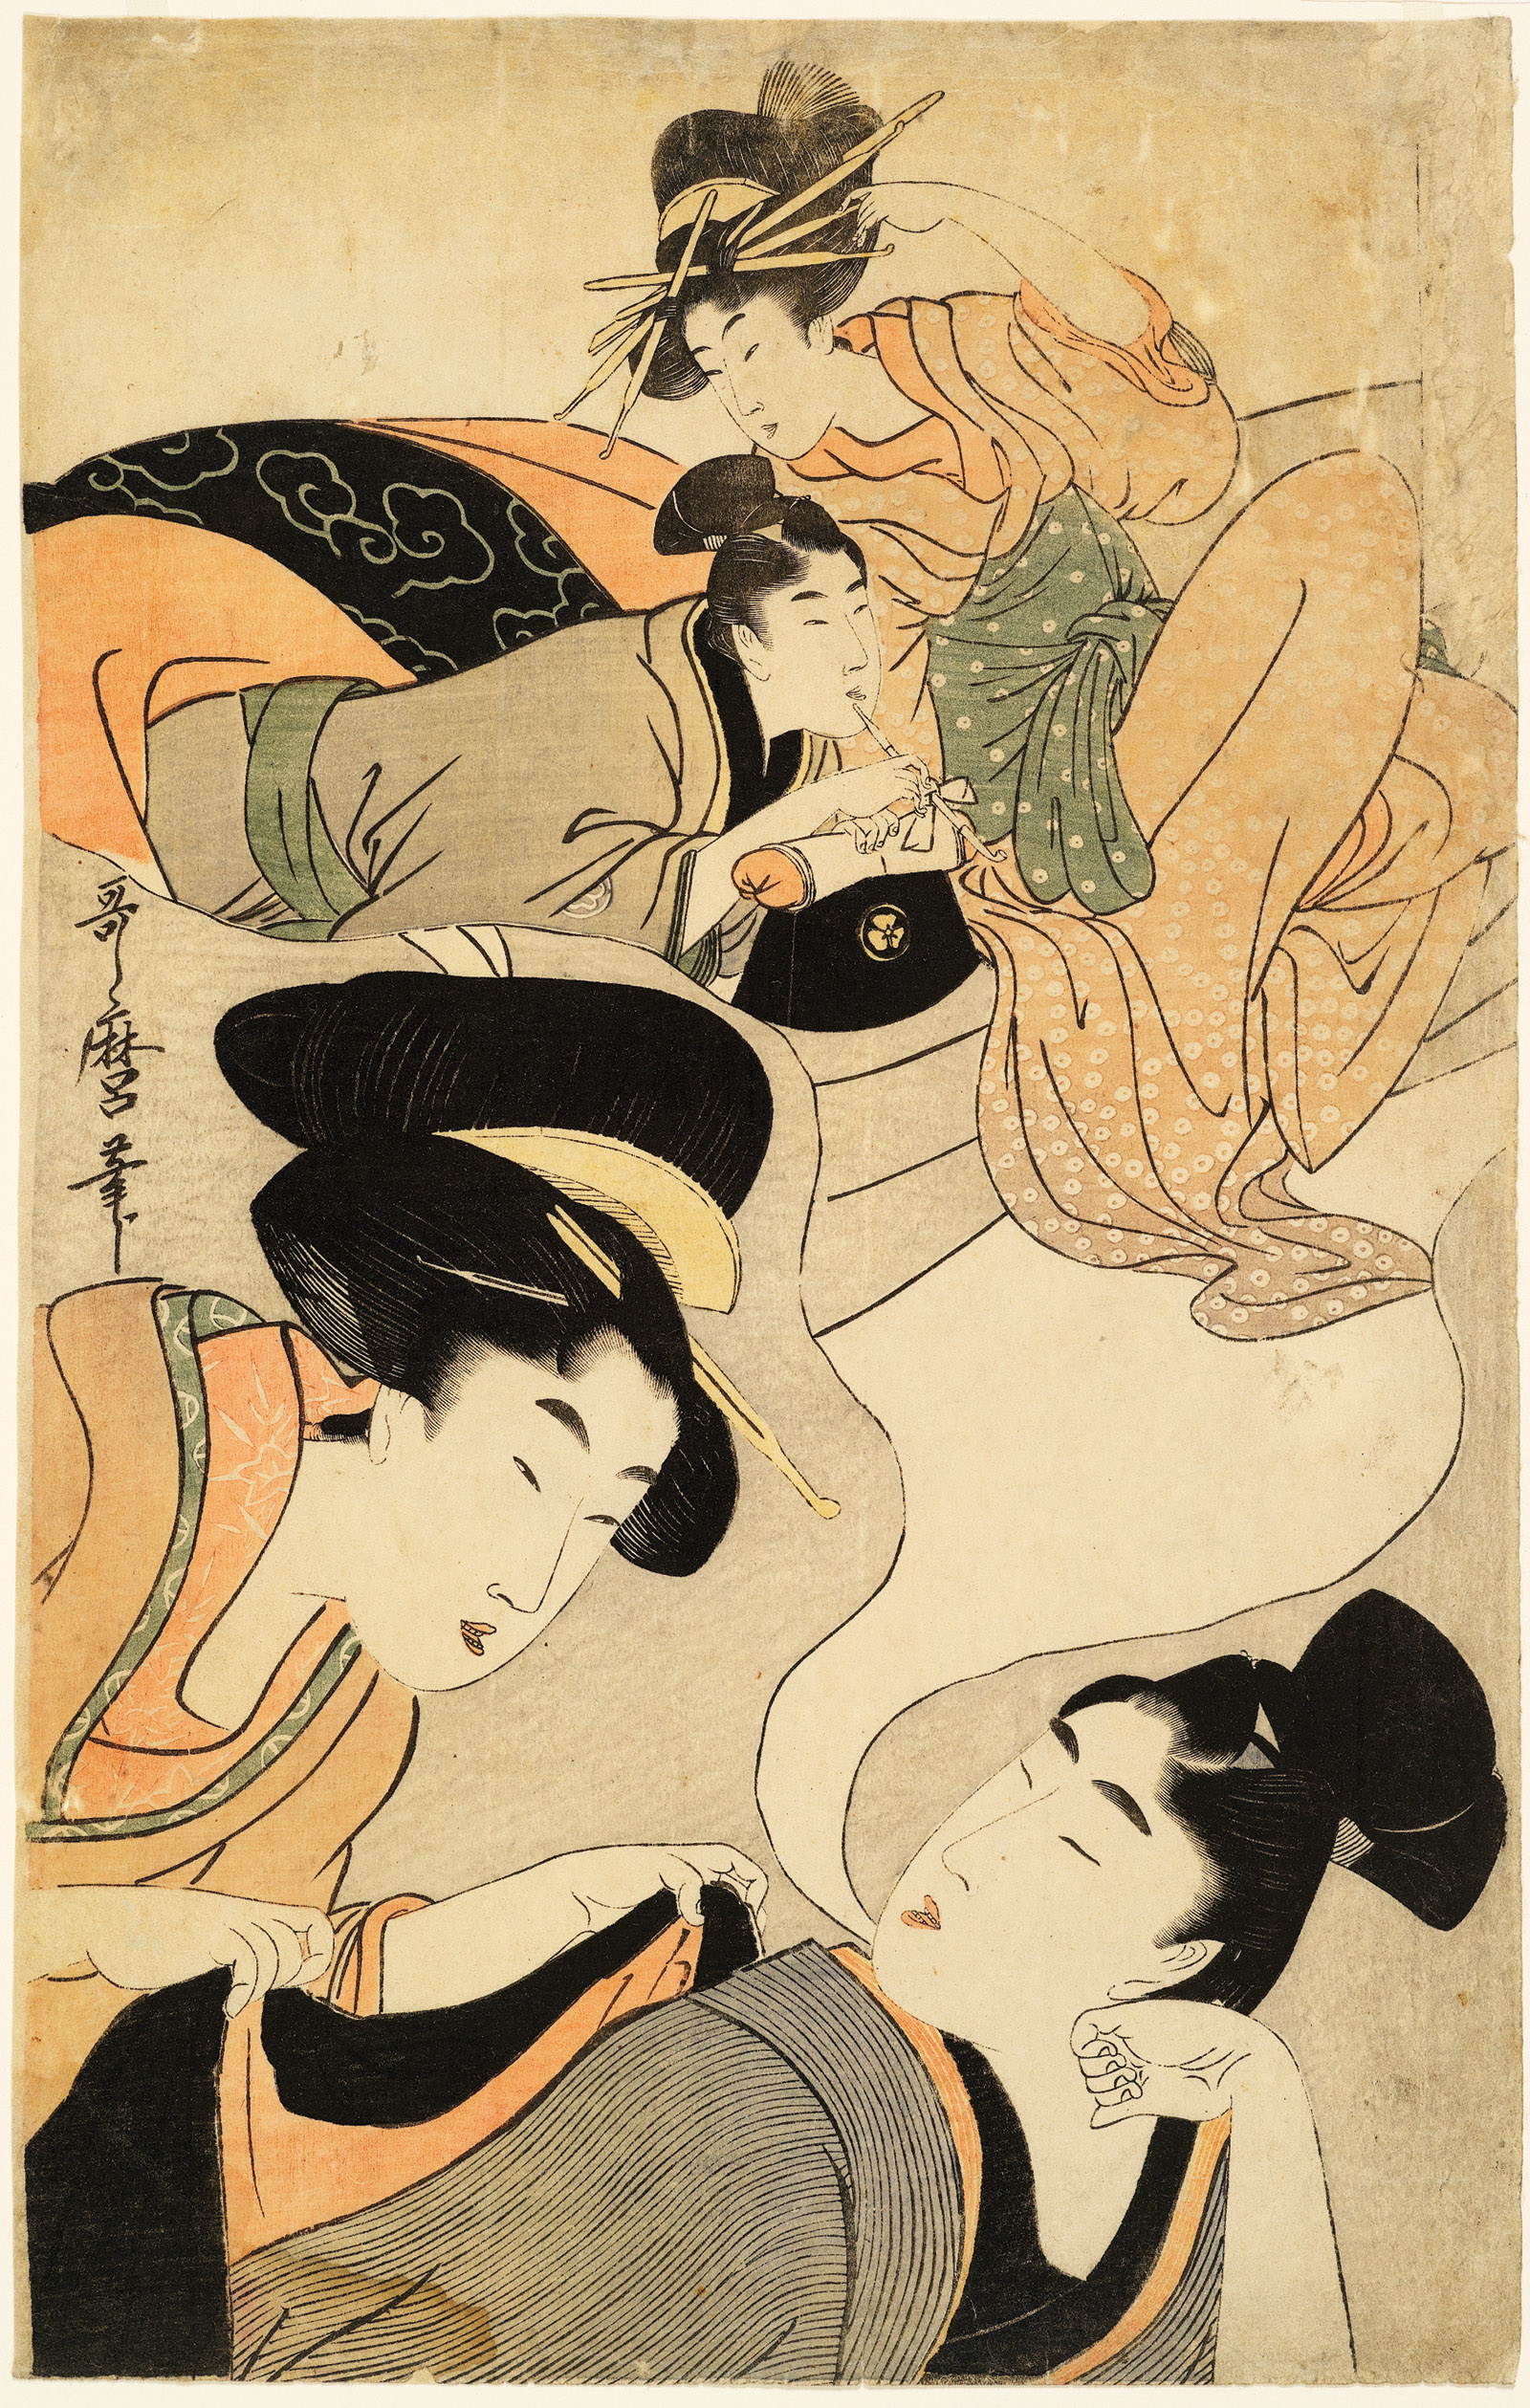 Kitagawa Utamaro: The Young Man’s Dream, from the series Profitable Visions in Daydreams of Glory, circa 1801–1802. In this woodcut, Ian Buruma writes, a wakashu,or ‘beautiful youth,’ is ‘dreaming of sleeping with a famous high-class courtesan (the dream is revealed in a cartoon-like bubble over his head), while a young woman solicitously wraps a jacket around his shoulders lest he catch a cold.’